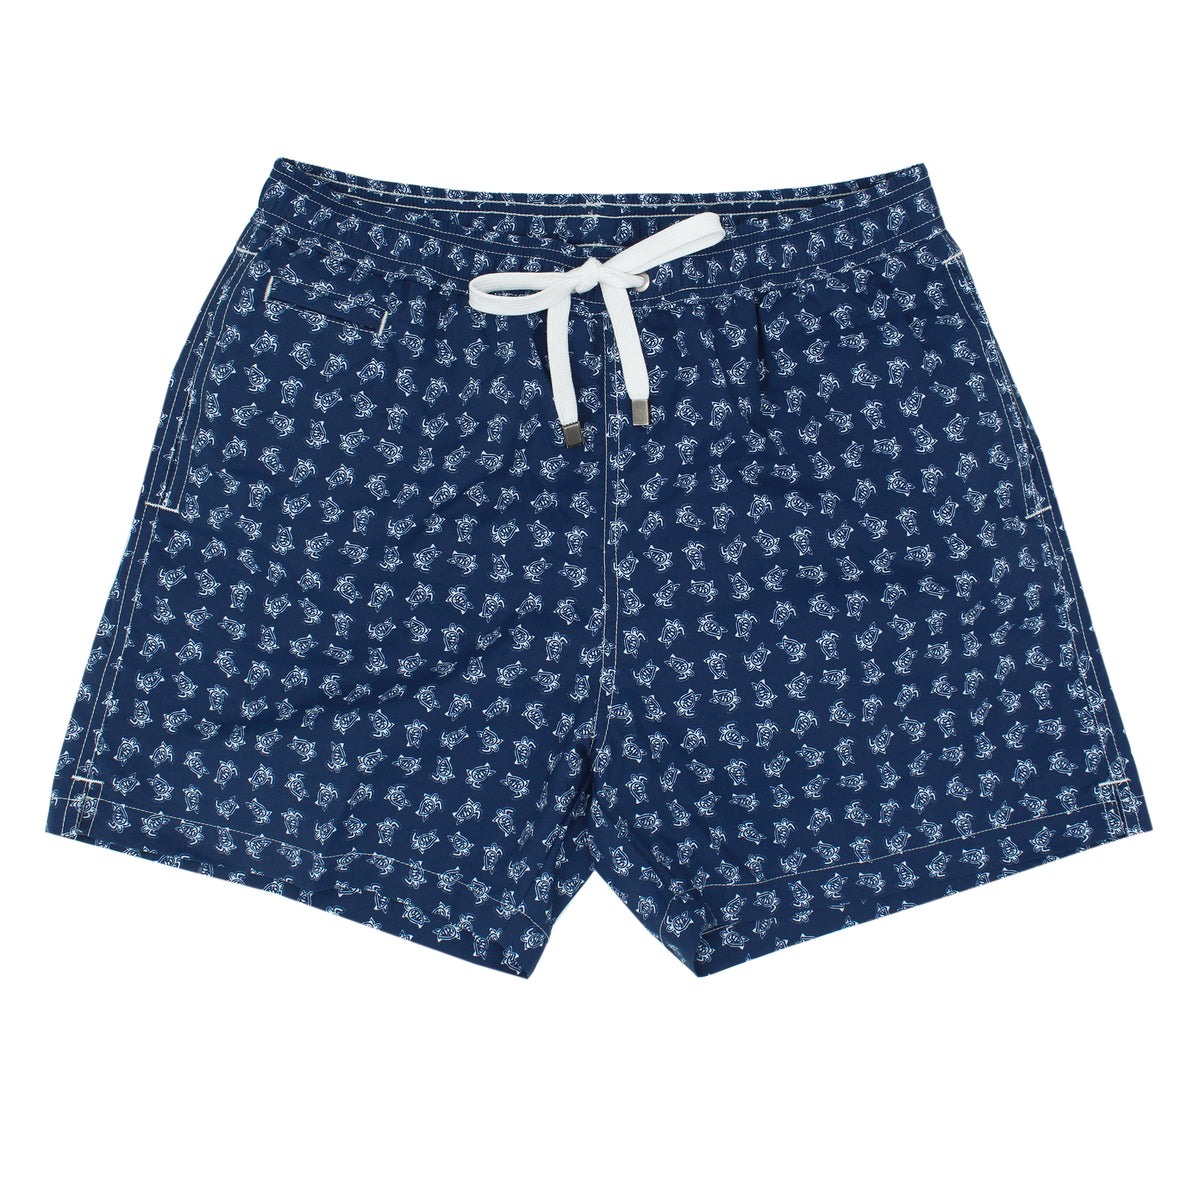 Blue beachwear with turtles. Quick-drying and multi- pockets